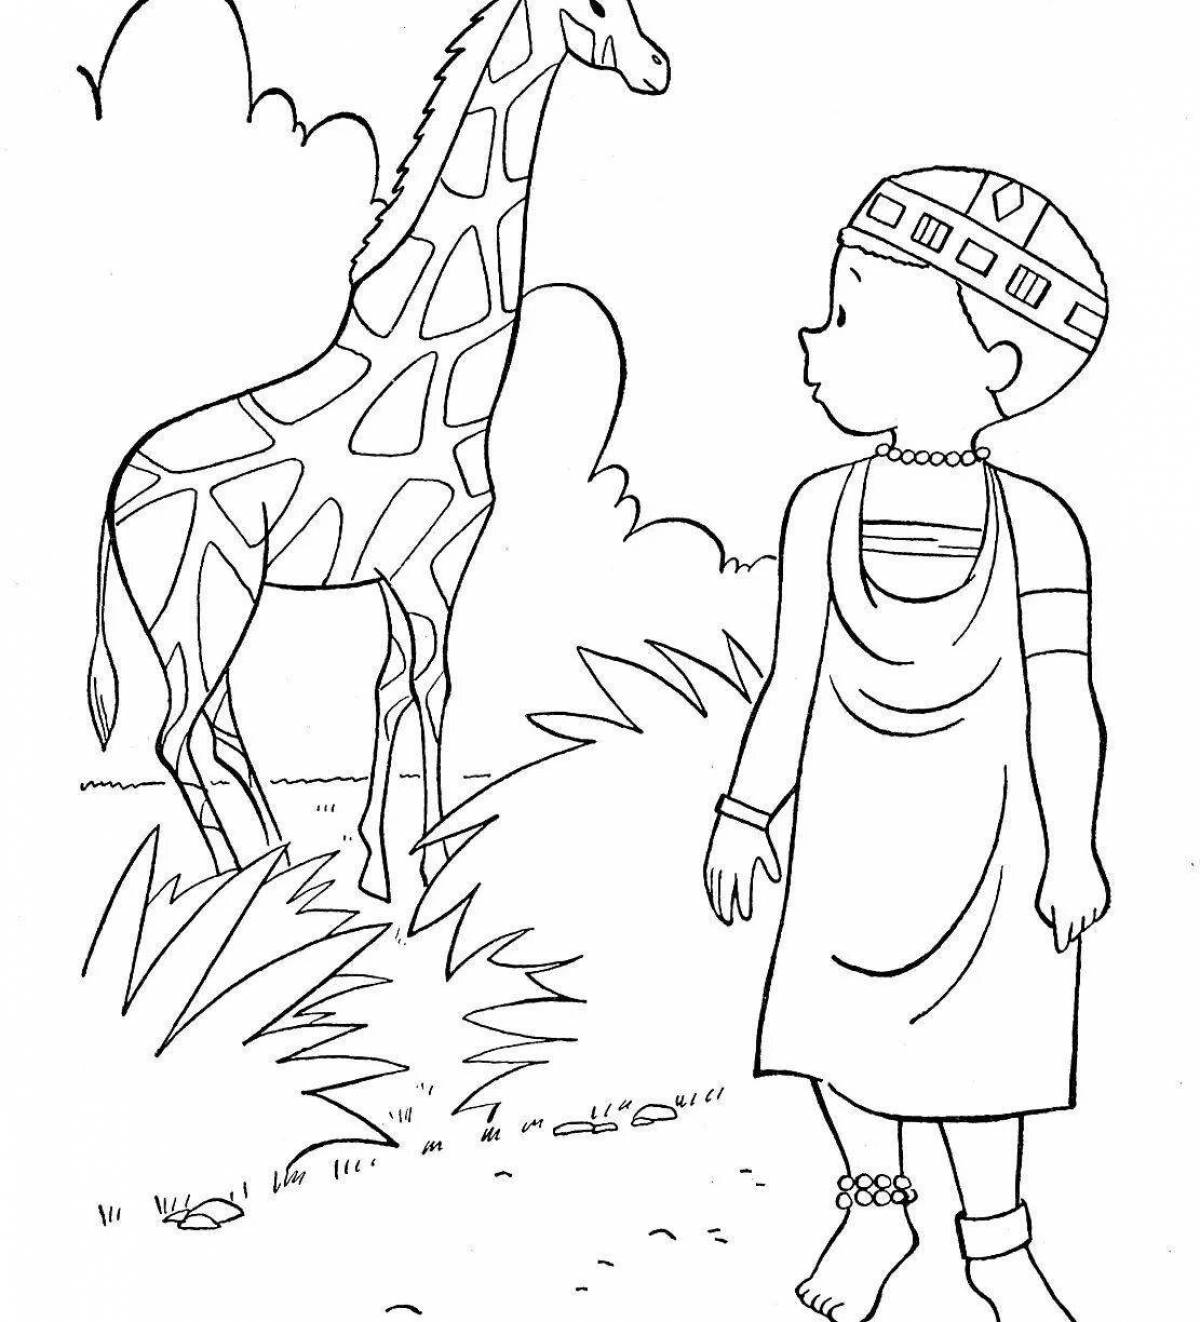 Playful African coloring book for kids